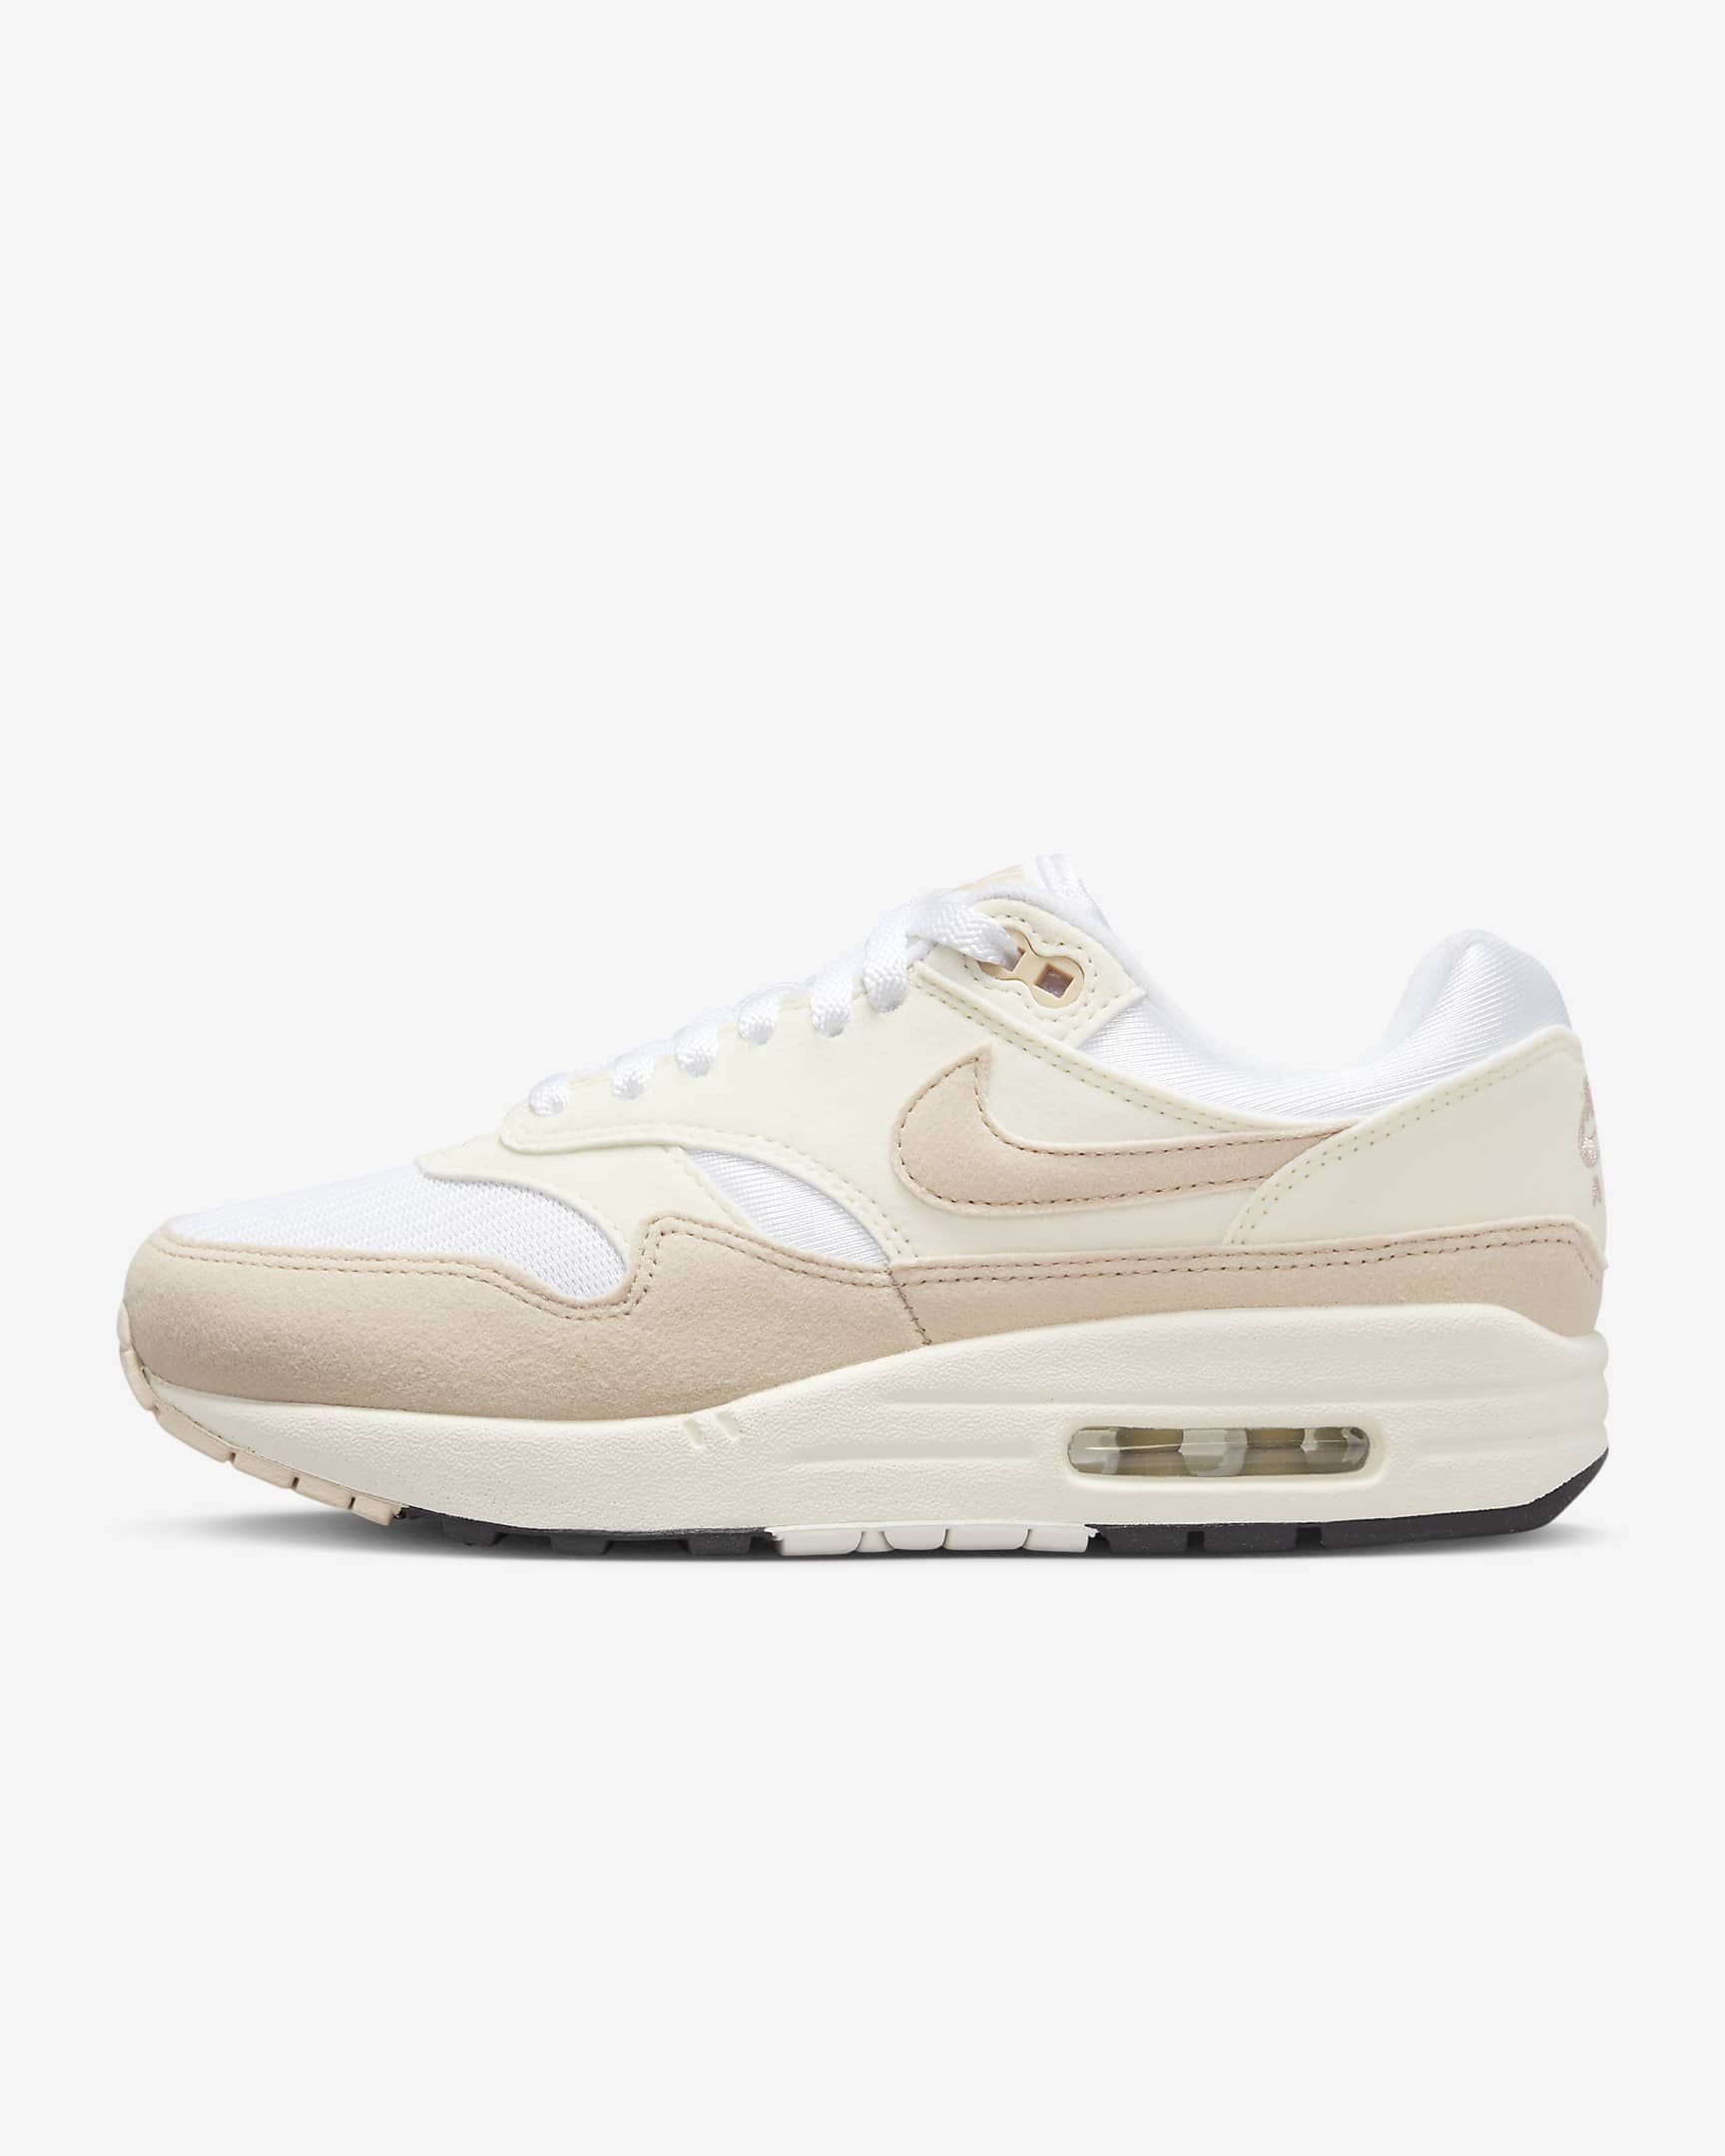 Nike Air Max 1Women's Shoes$119.97Discounted from$14014% off | Nike (US)